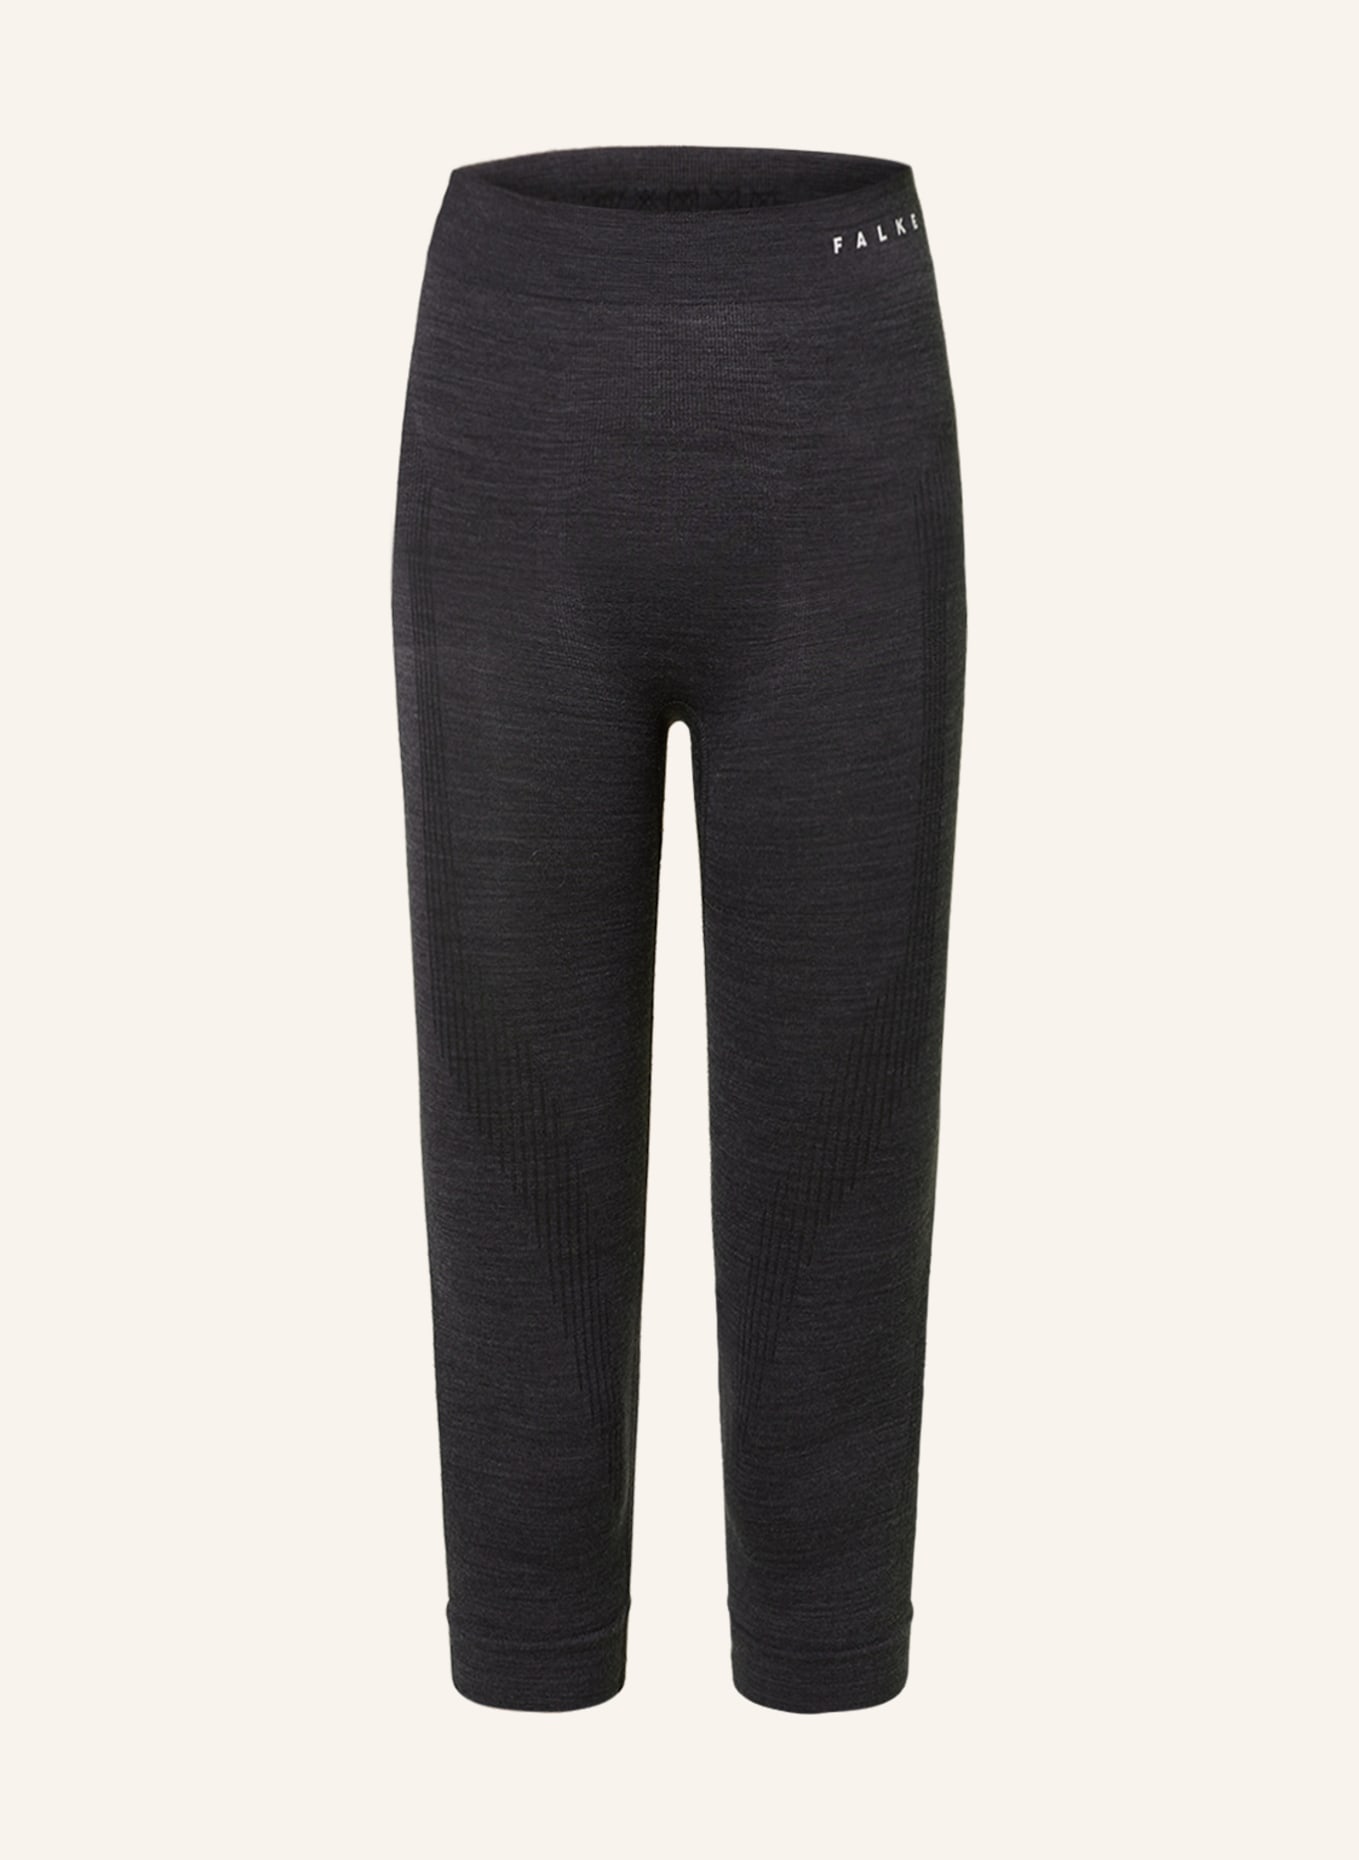 FALKE Functional underwear trousers WOOL-TECH with cropped legs, Color: DARK GRAY (Image 1)